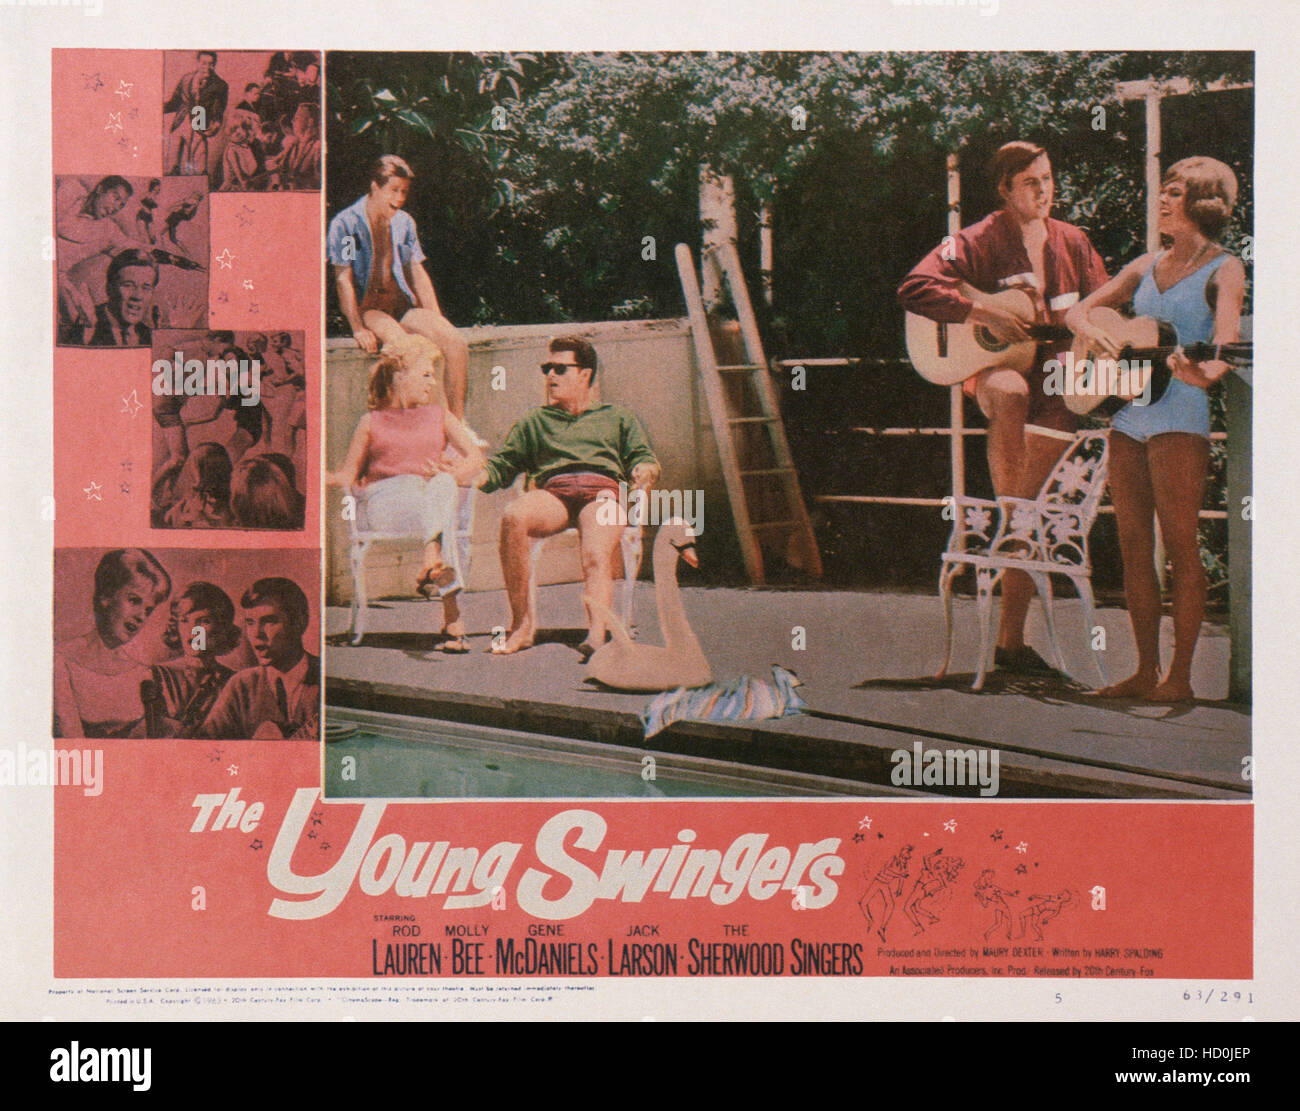 THE YOUNG SWINGERS, US lobbycard, Molly Bee, (left), Rod Lauren, (second left, sunglasses), Jo Helton, (far right), 1963 Stock Photo